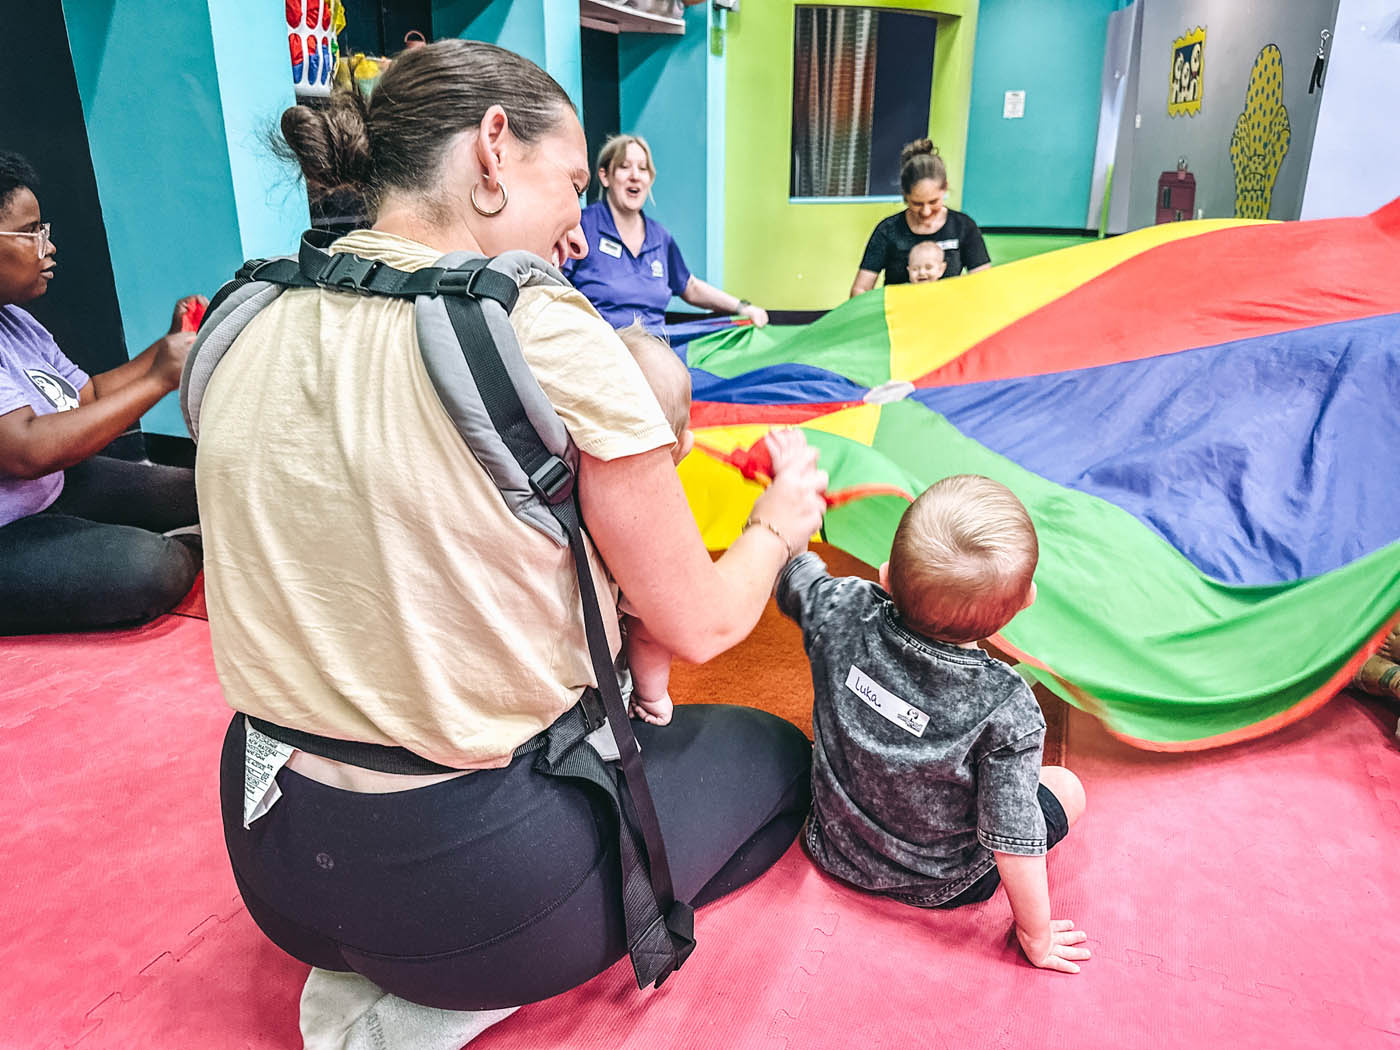 A Romp n' Roll instructor siting with a child at a kids gym franchise class.